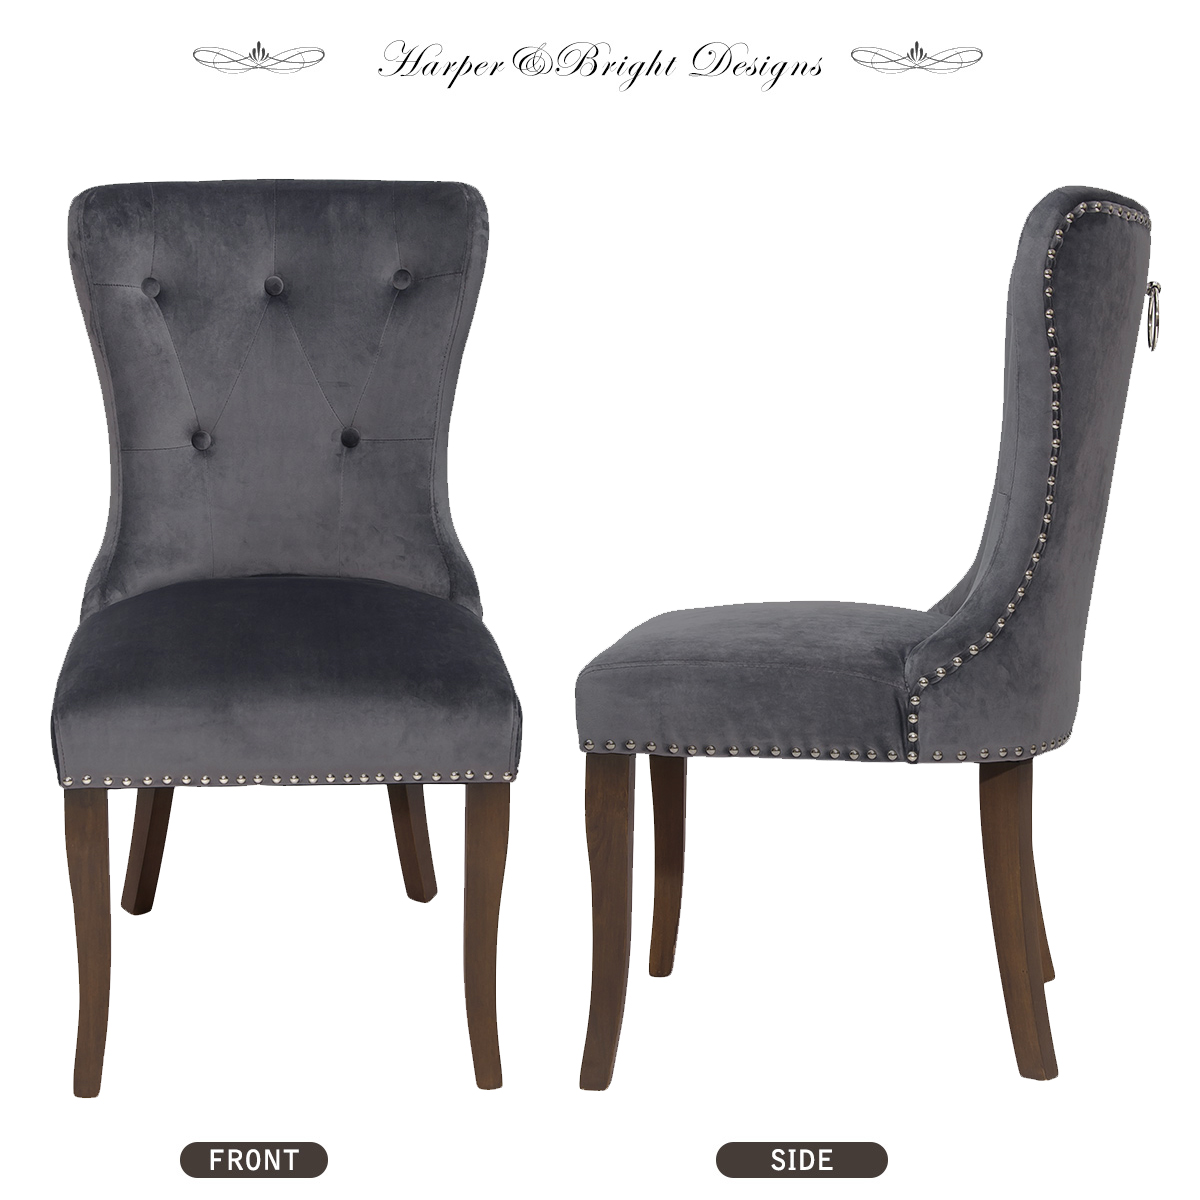 Victorian Dining Chair Button Tufted Armless Chair Upholstered Accent Chair,Nailhead Trim,Chair Ring Pull Set of 2 (Grey)-Boyel Living